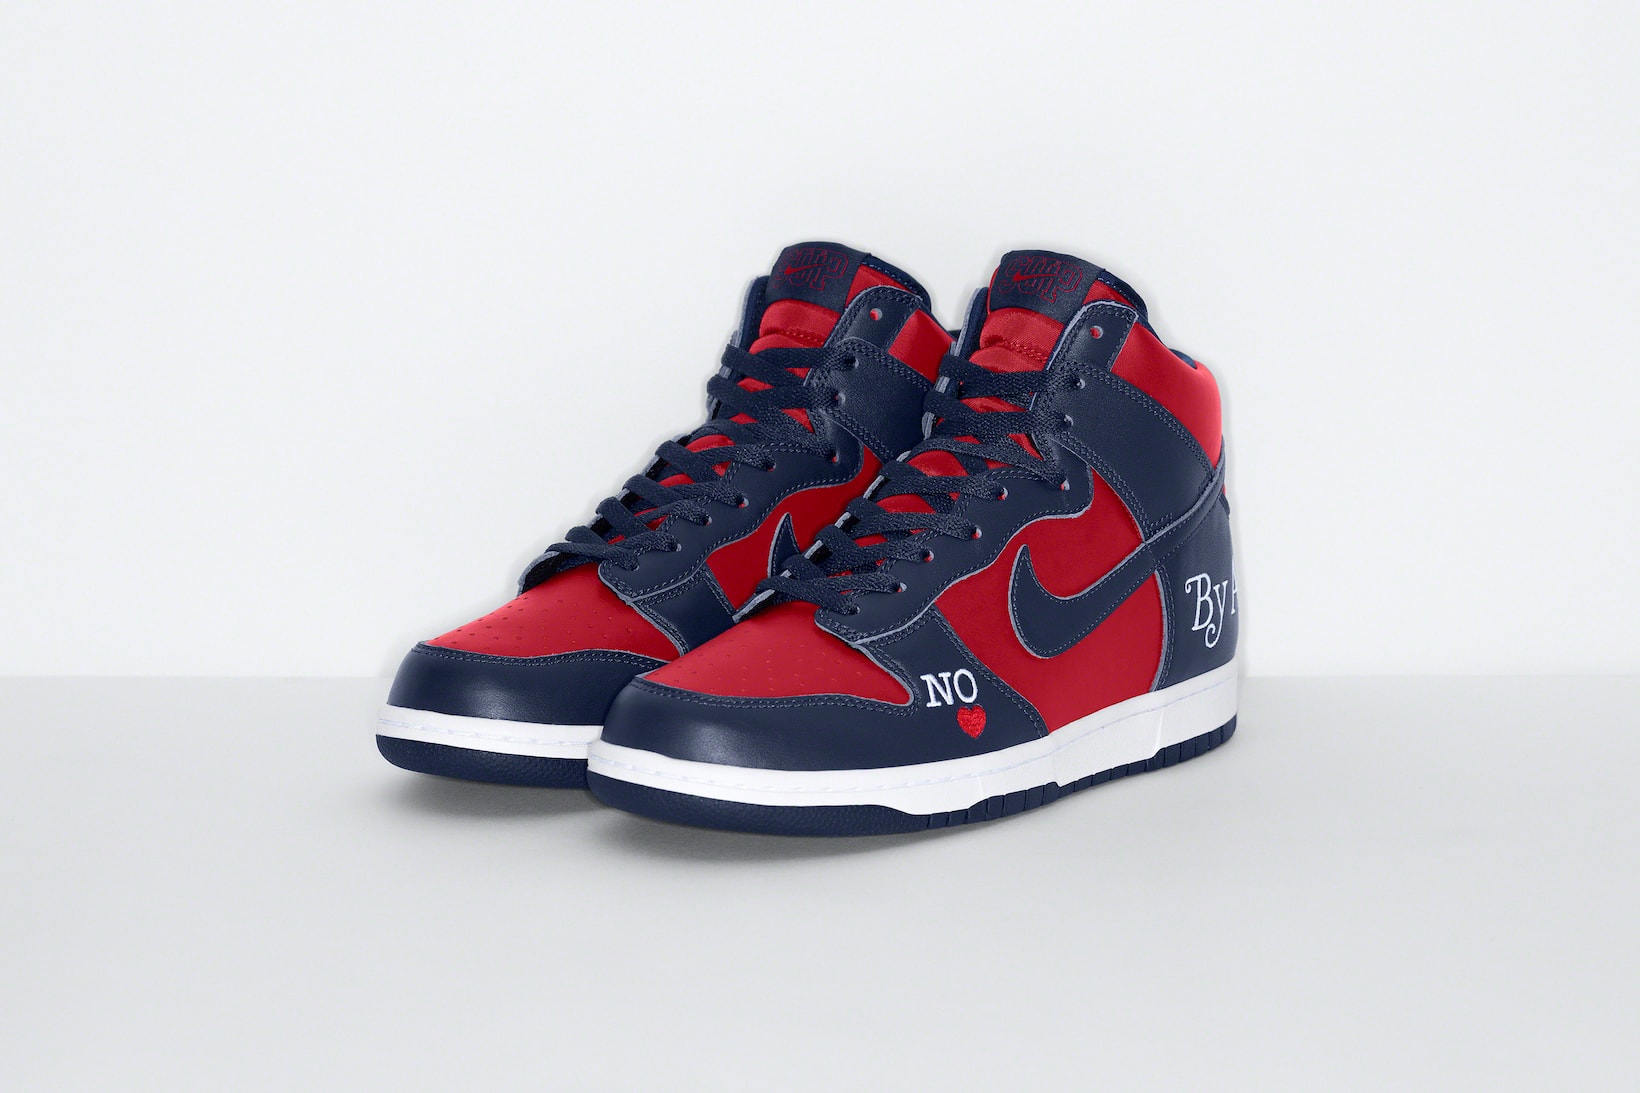 Supreme Nike Dunk High Sneakers Collaboration Red Navy Blue